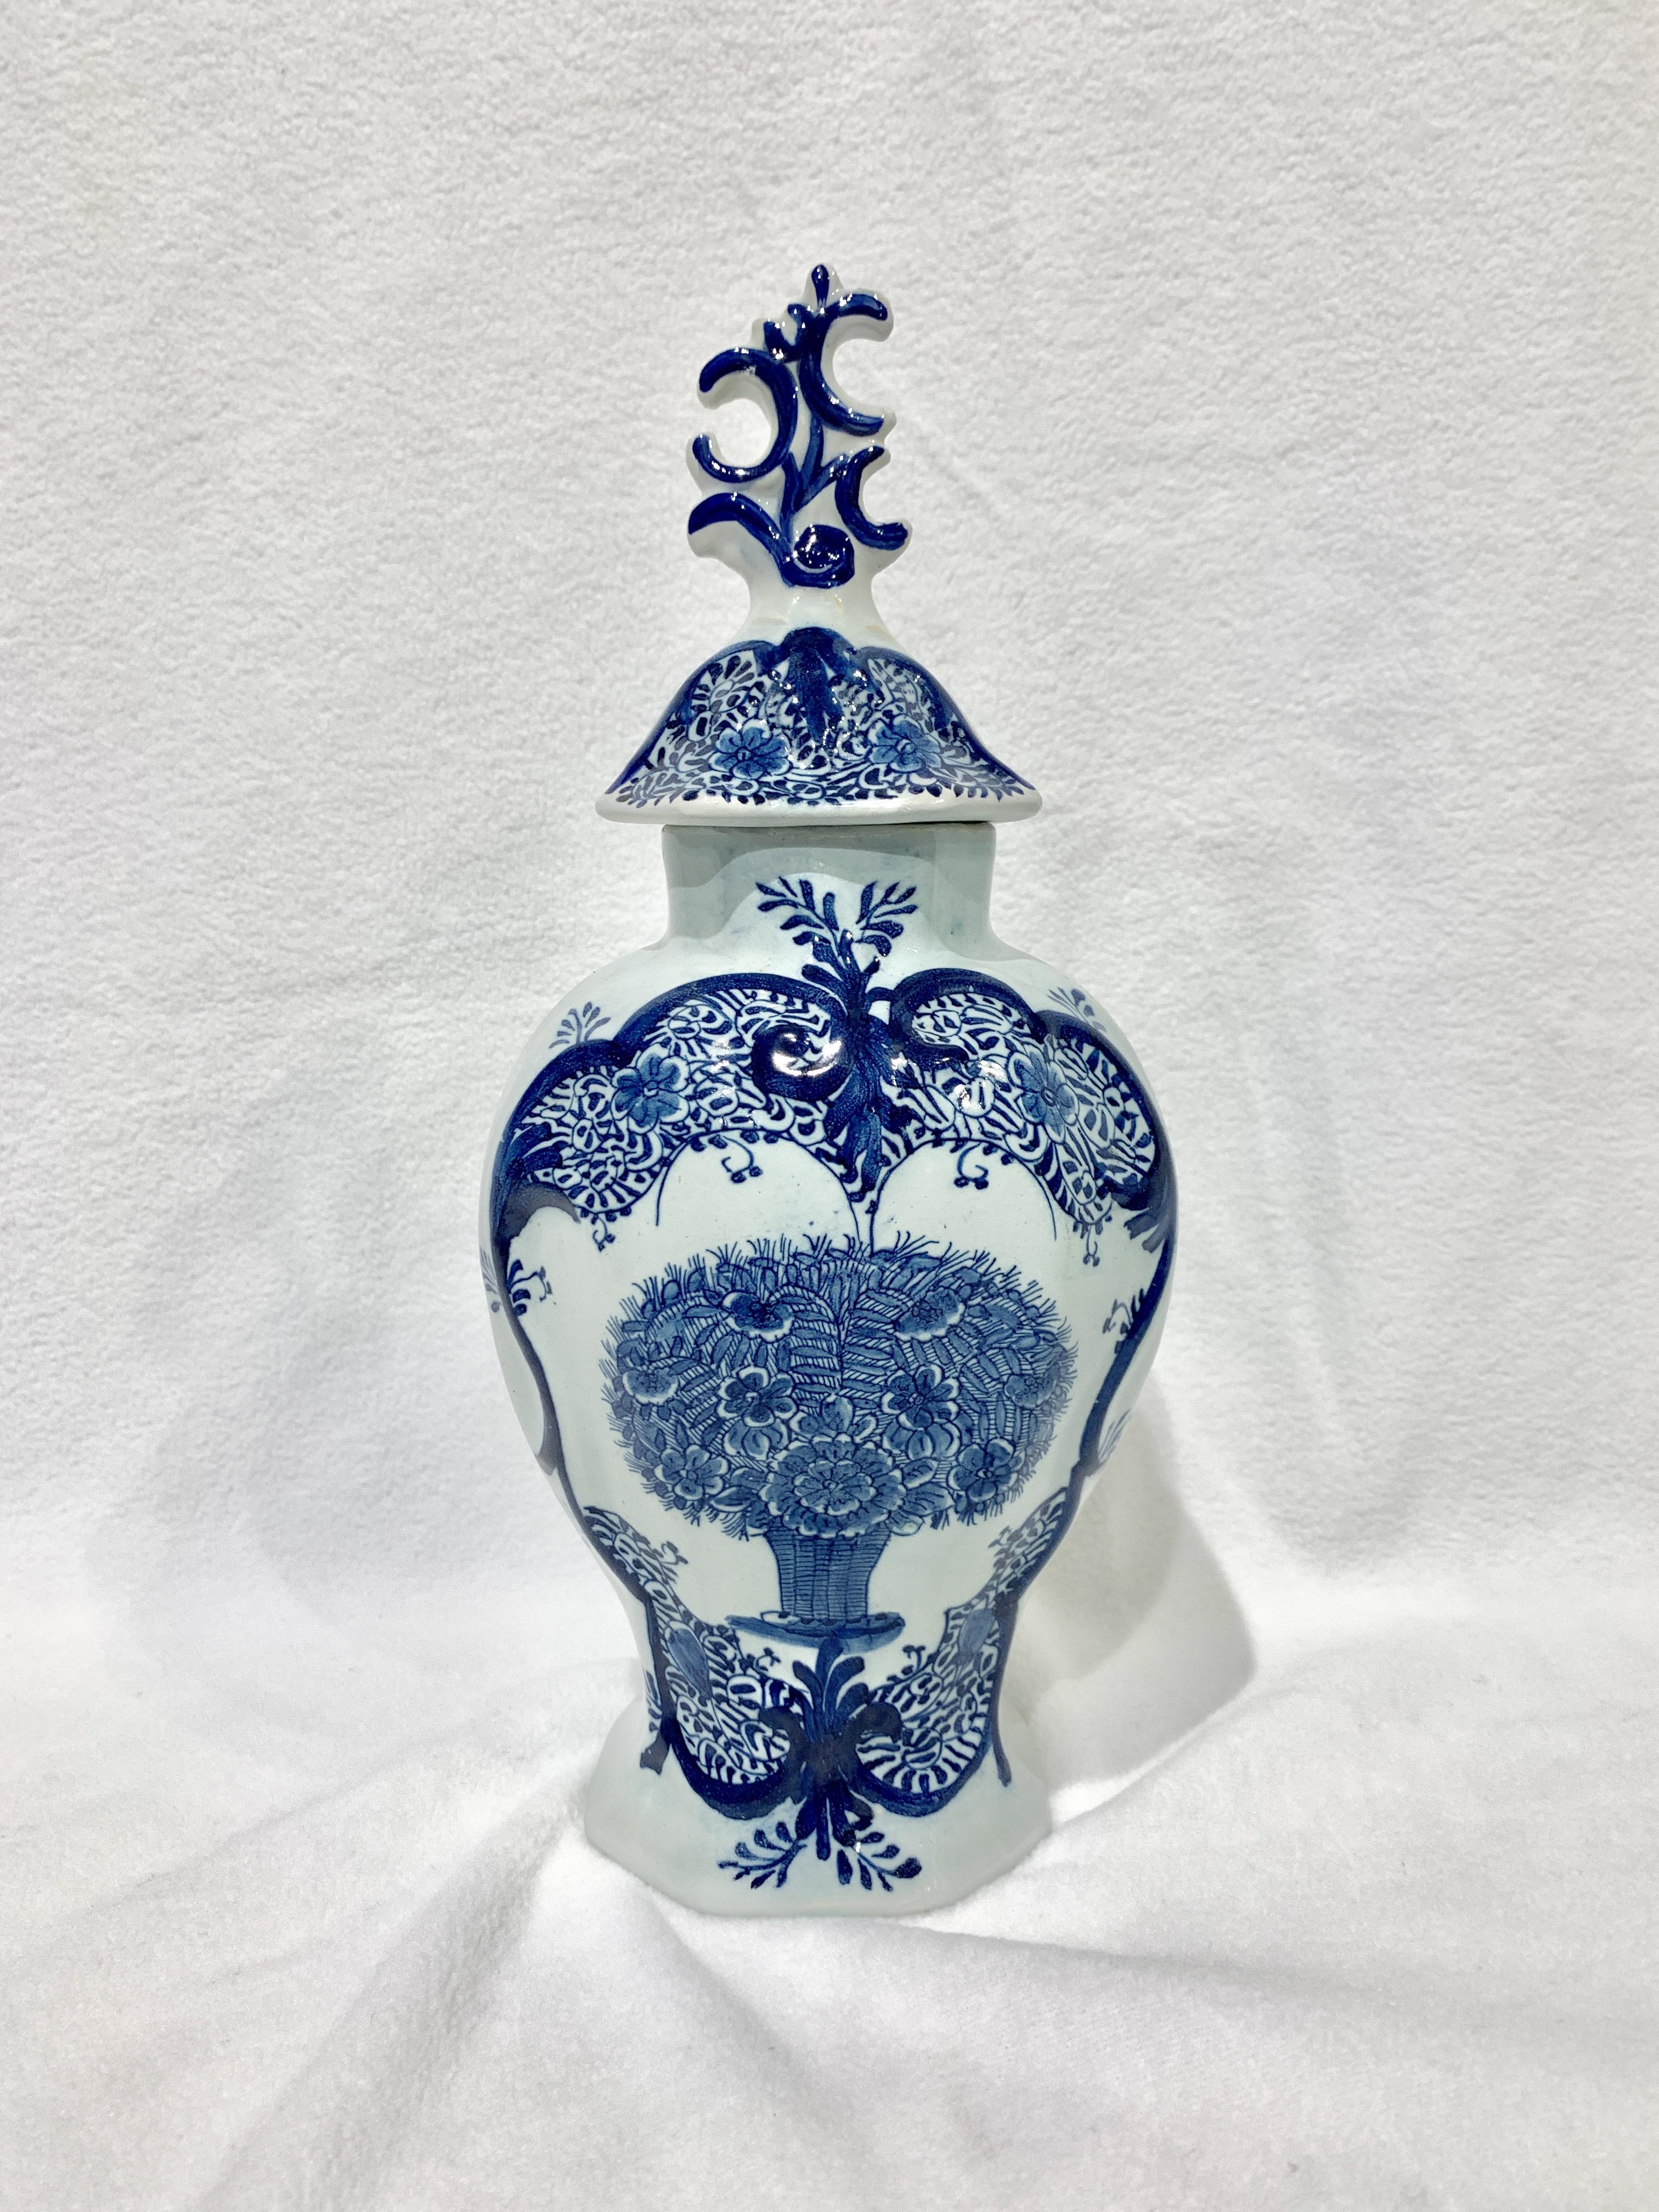 Collection of Dutch Delft Blue and White Vases Mid 18th Century 2